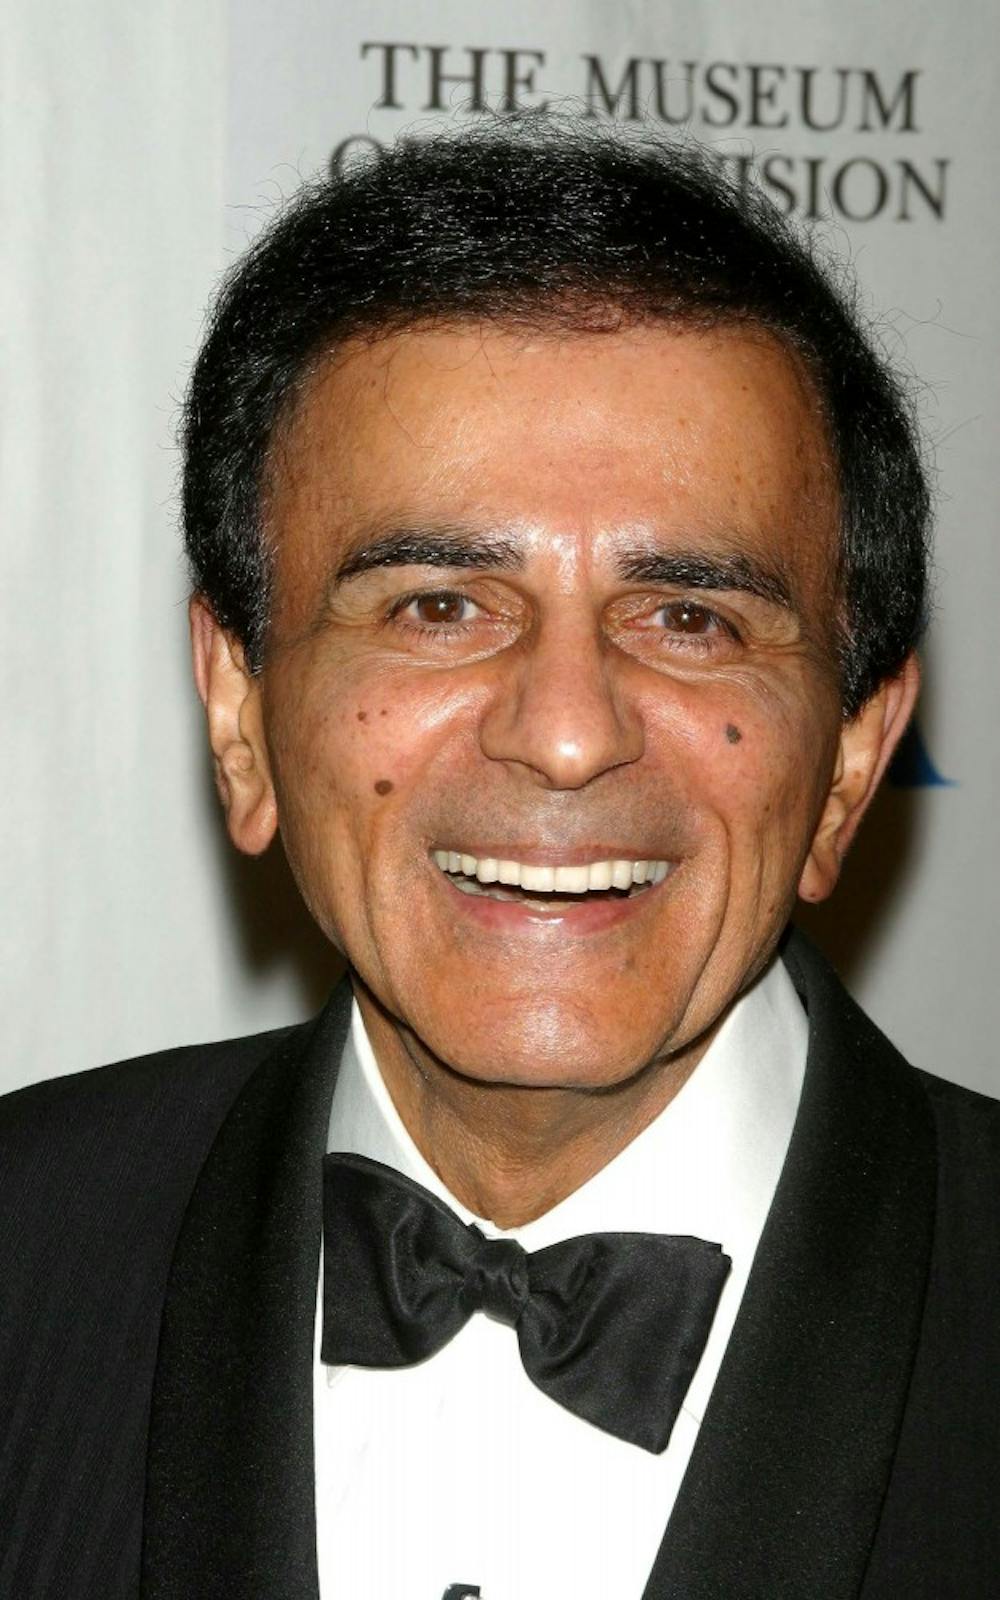 Casey Kasem, the voice of the syndicated show "American Top 40" died Sunday morning on June 15, 2014, at age 82. (Mylan Ryba/Globe Photos via Zuma Press/MCT)